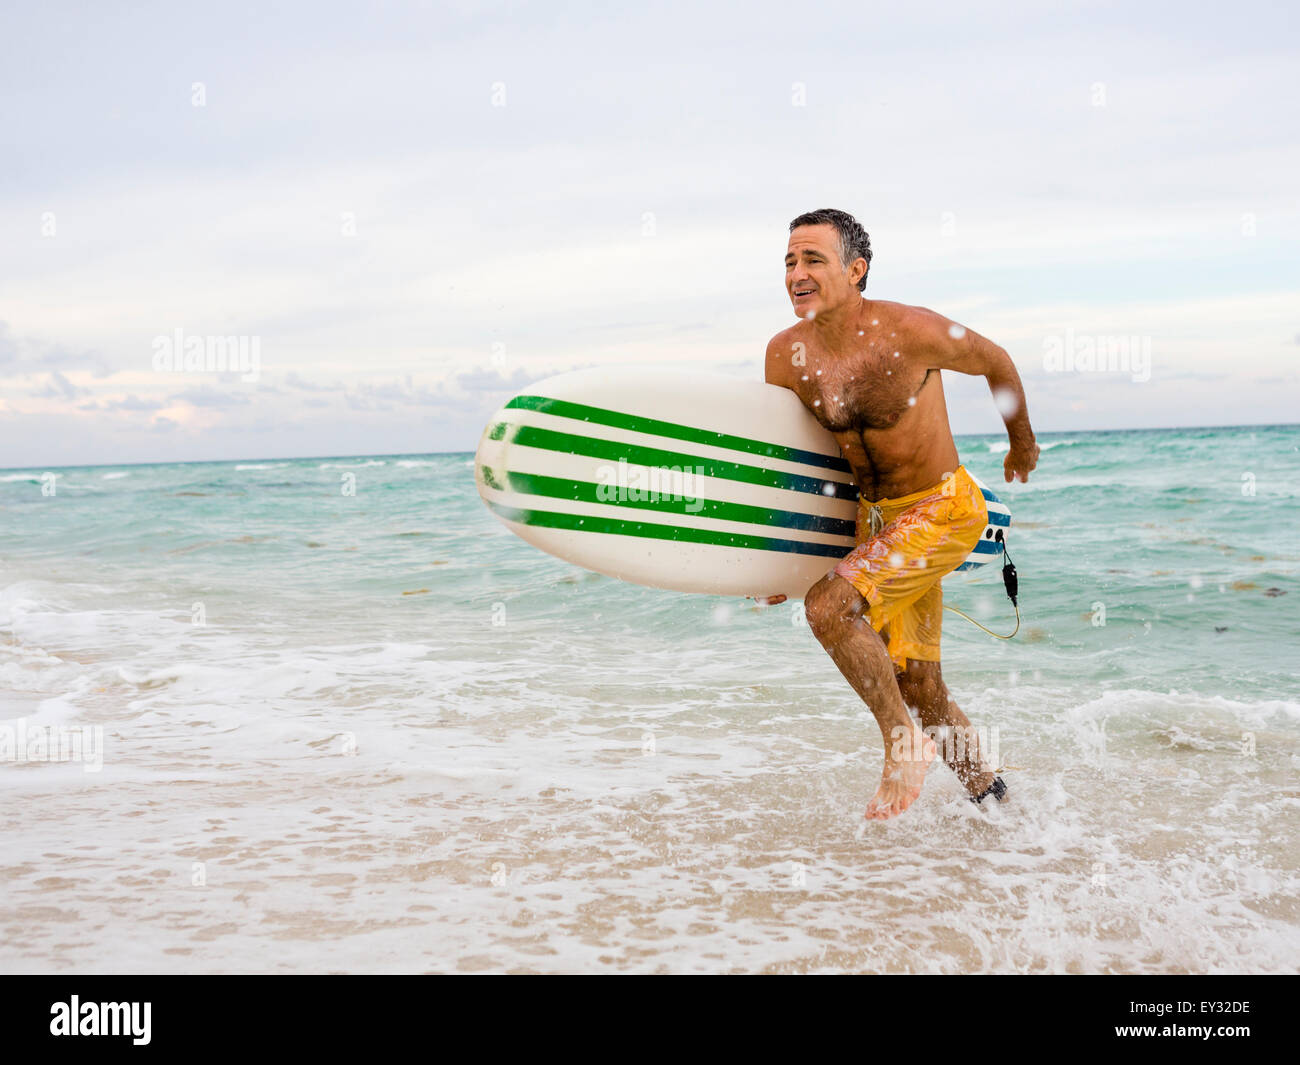 Senior man running quickly out of the surf holding a surfboard Stock Photo